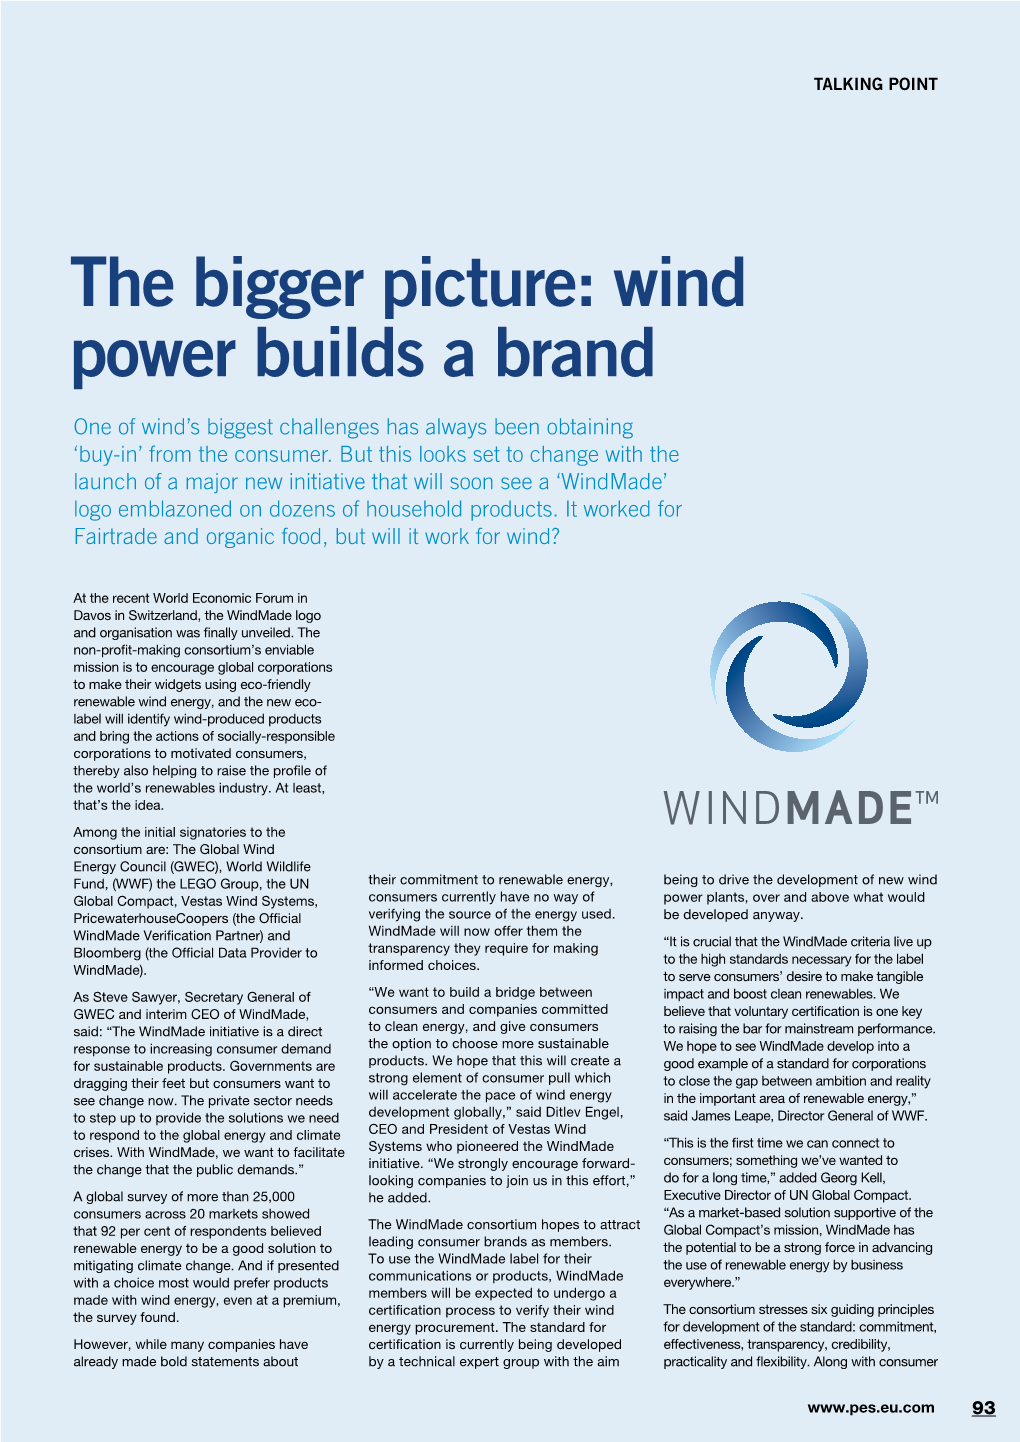 Wind Power Builds a Brand